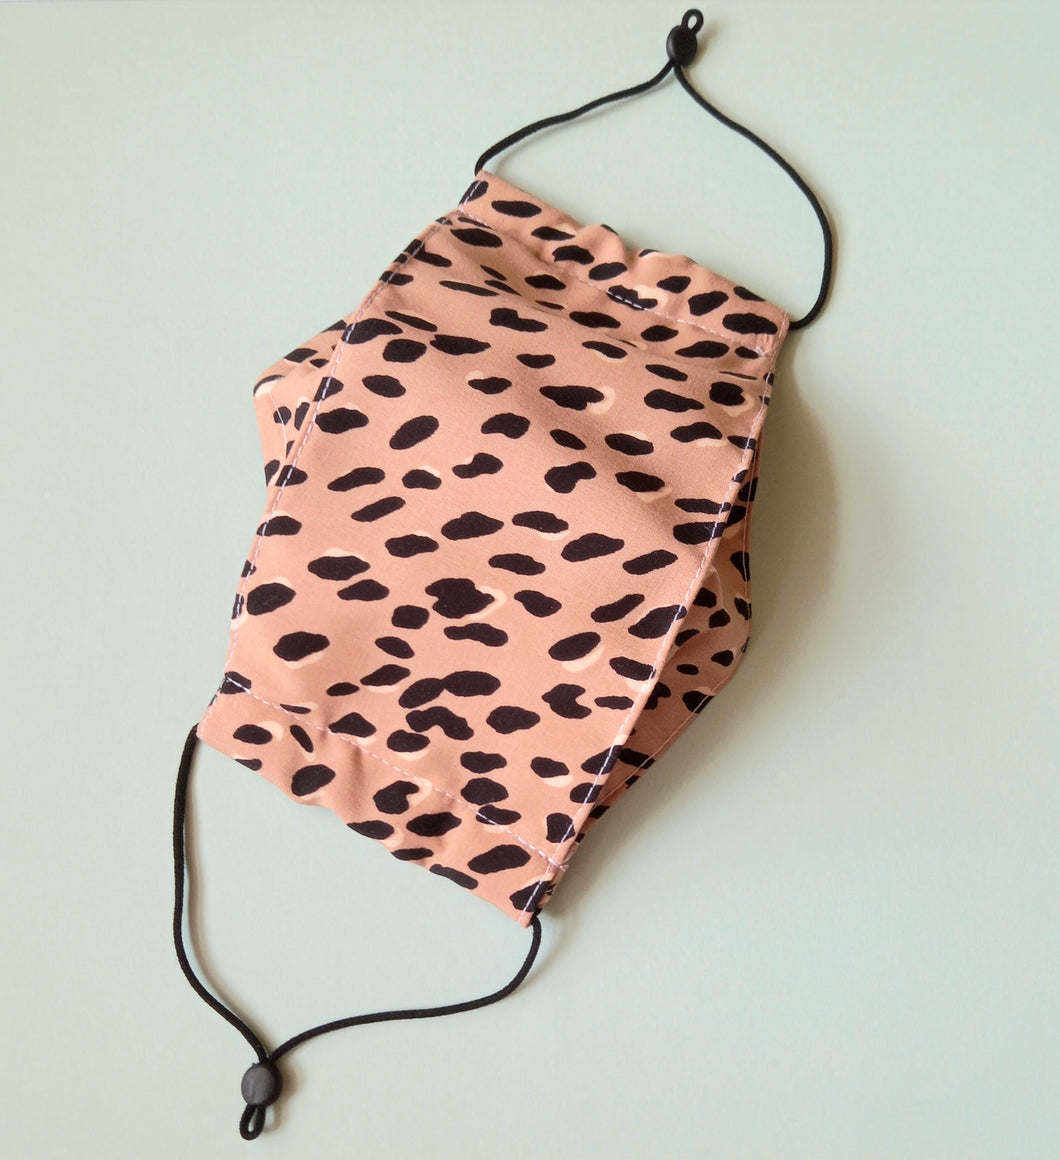 Reusable Fabric Mask / Nude Leopard Animal Print with Filter Pocket, Adjustable Straps